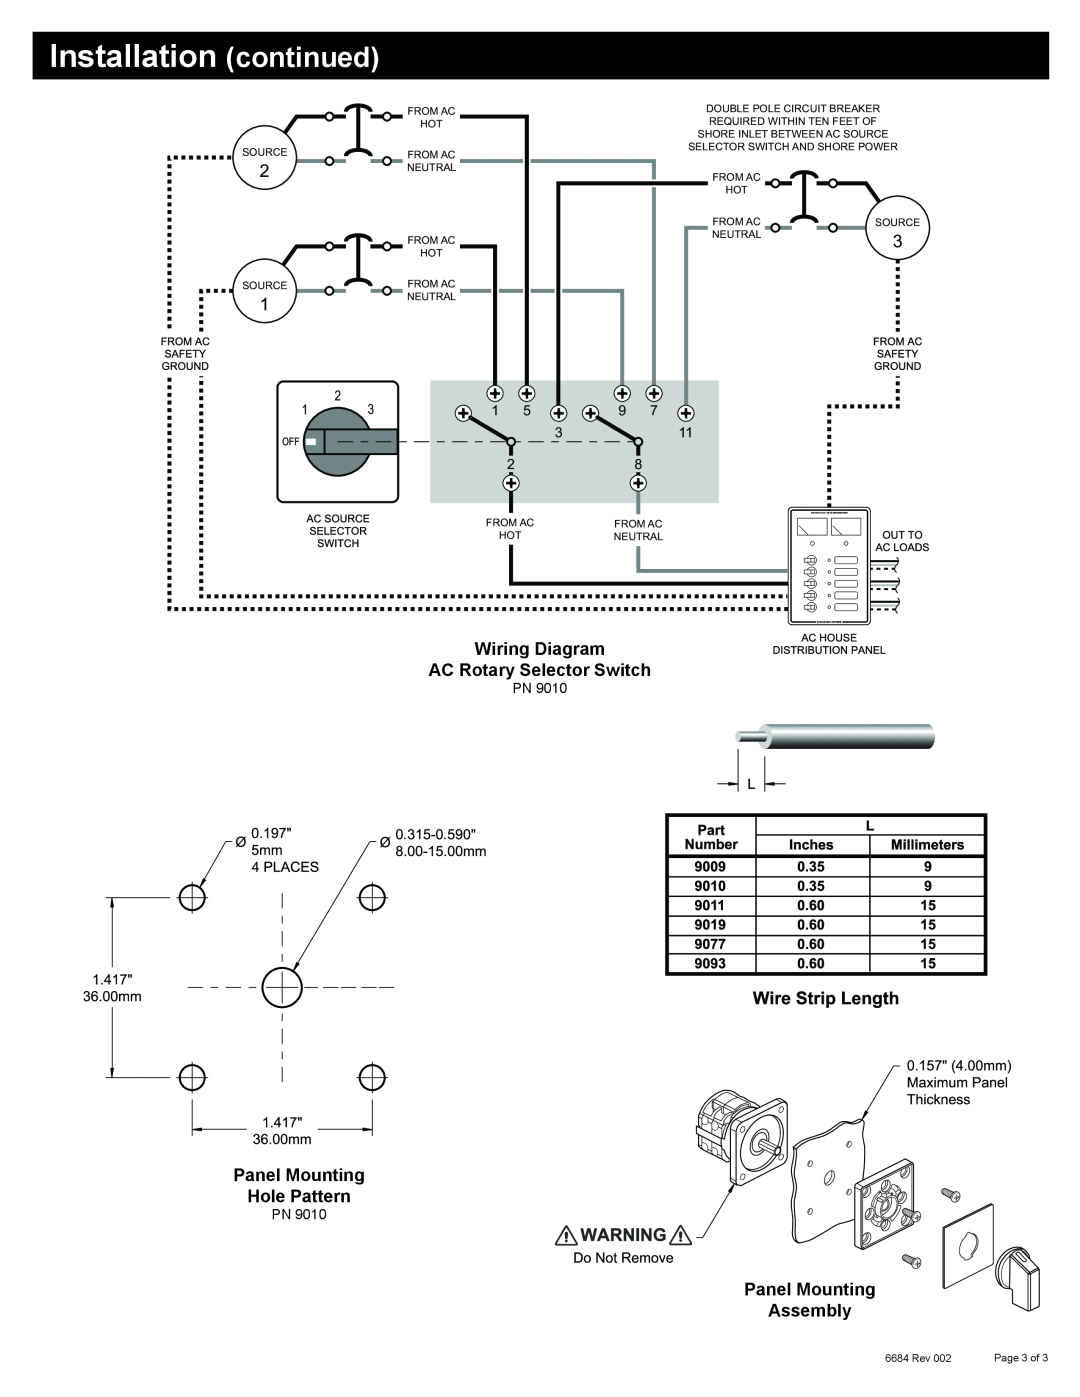 Blue Sea Systems PN 9010 Wiring Diagram AC Rotary Selector Switch, Panel Mounting Hole Pattern, Panel Mounting Assembly 